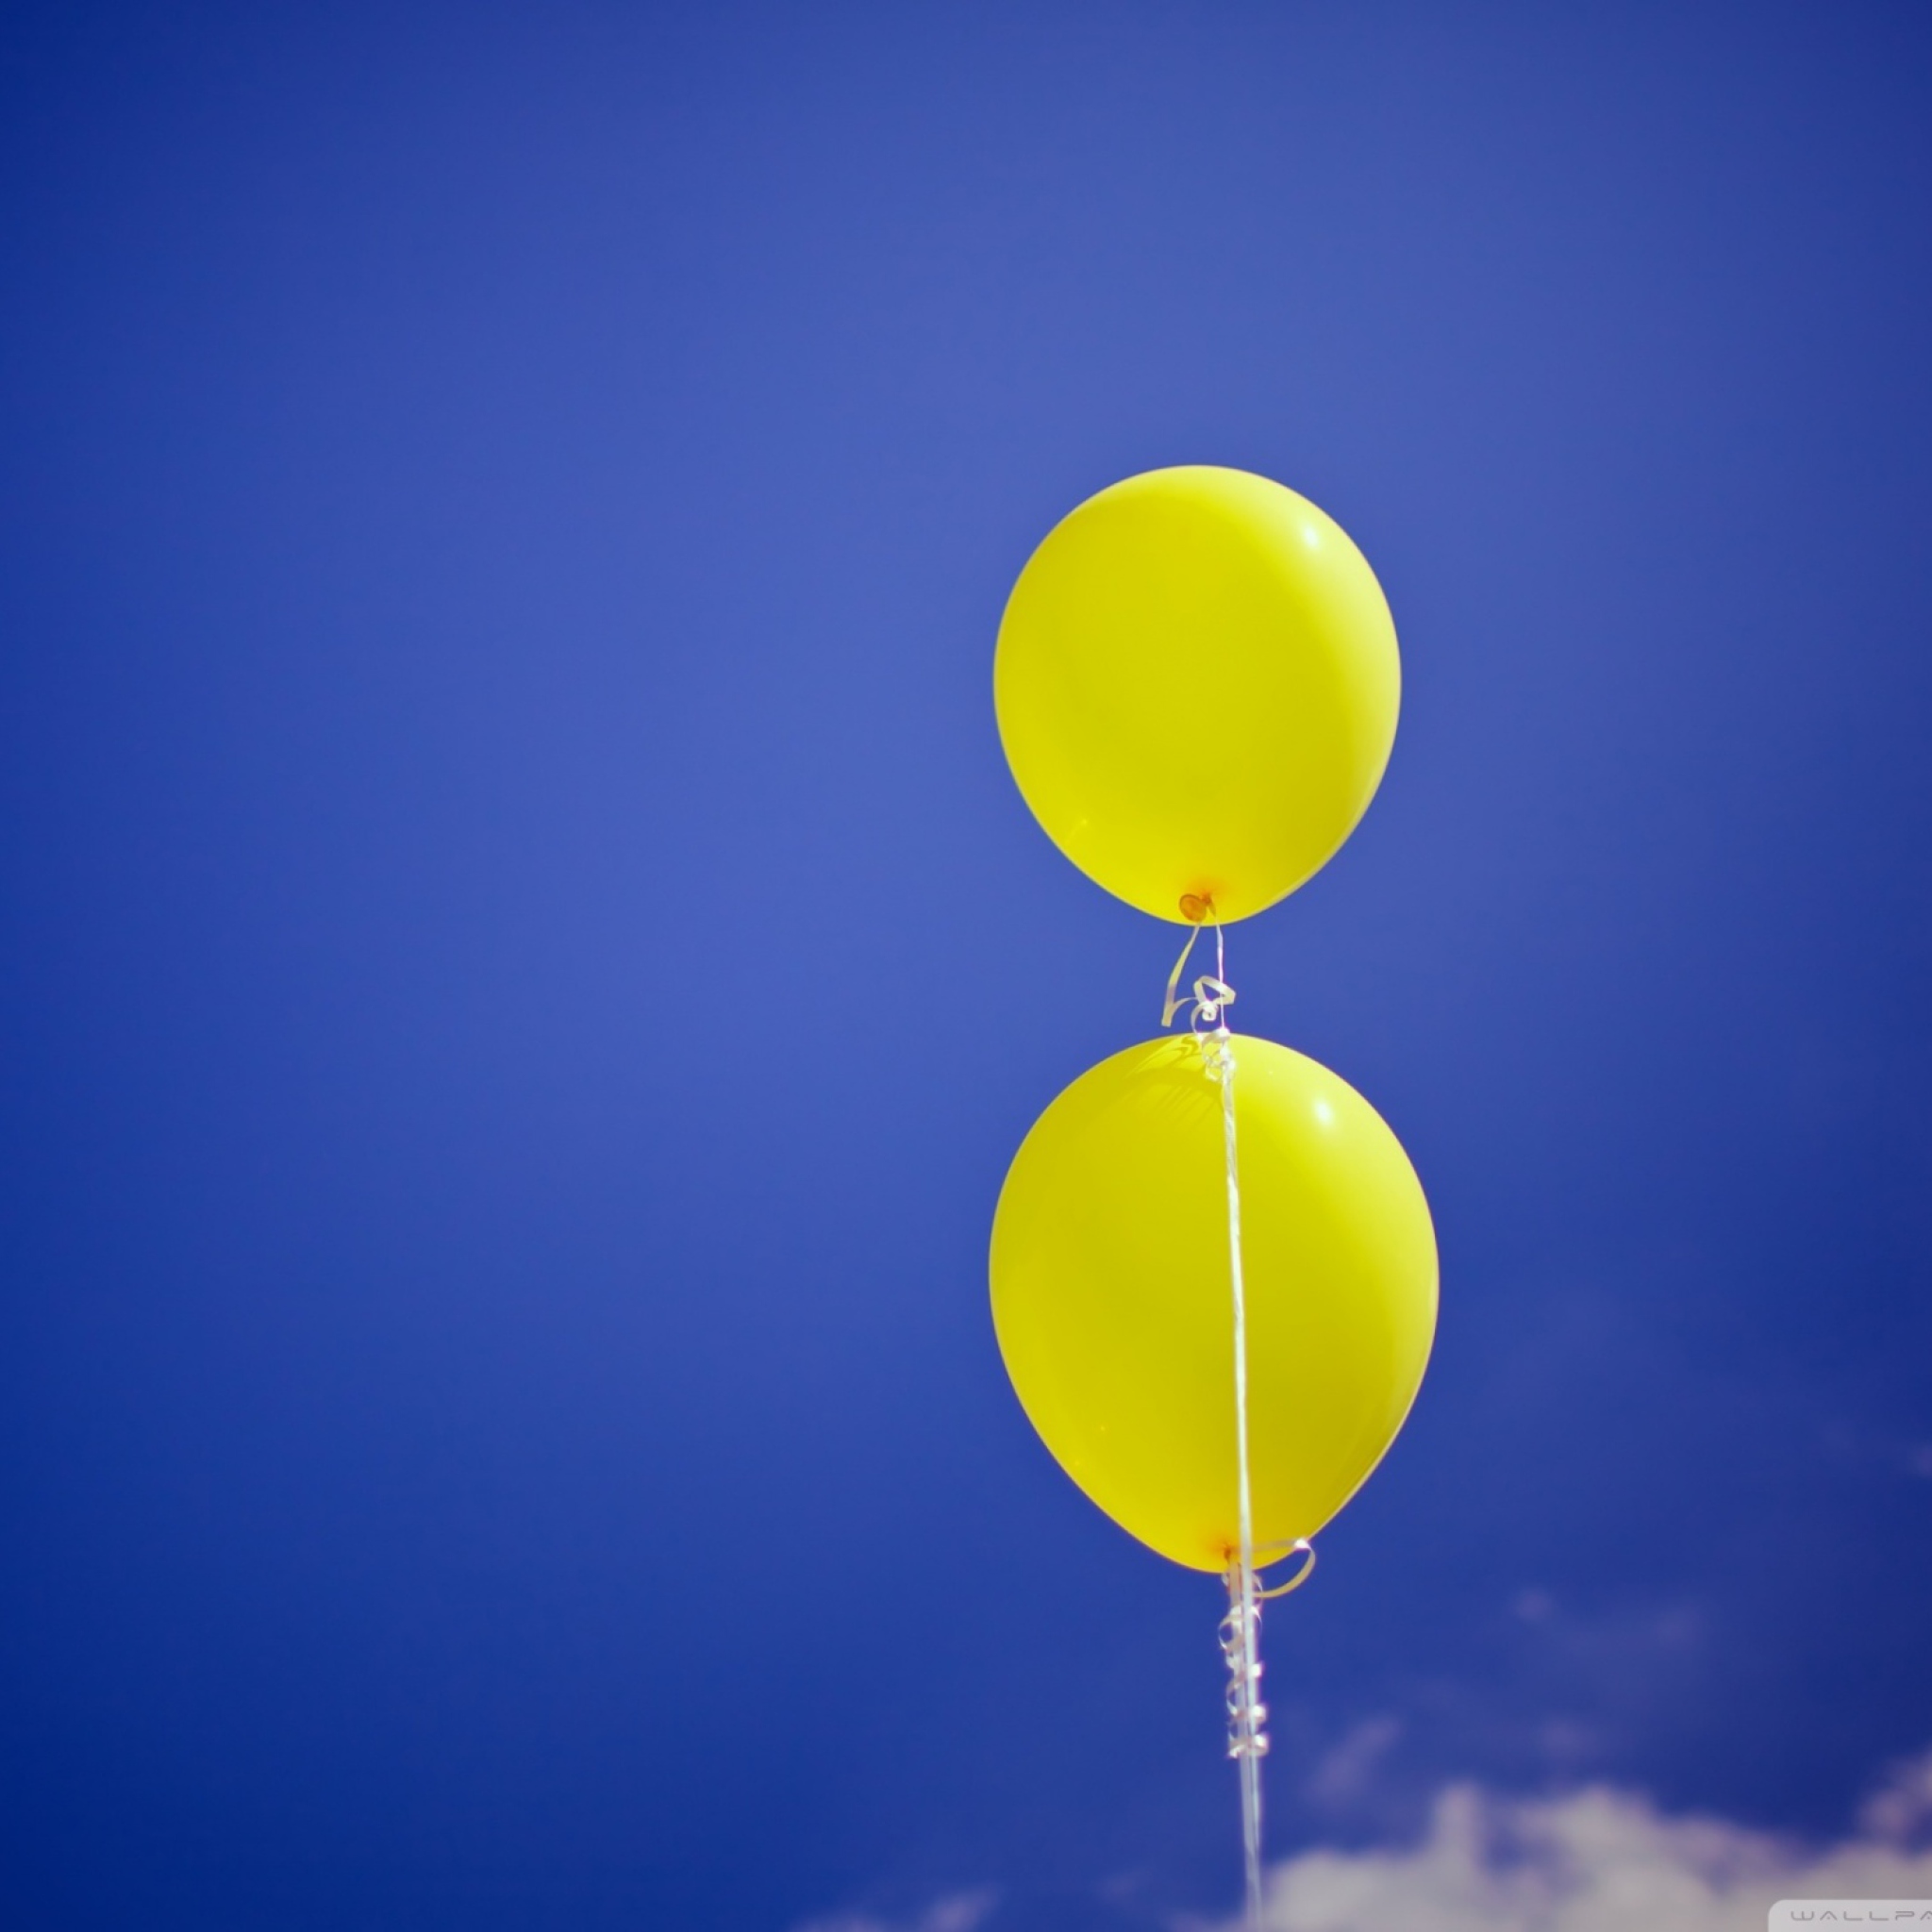 Yellow Balloons In The Blue Sky wallpaper 2048x2048